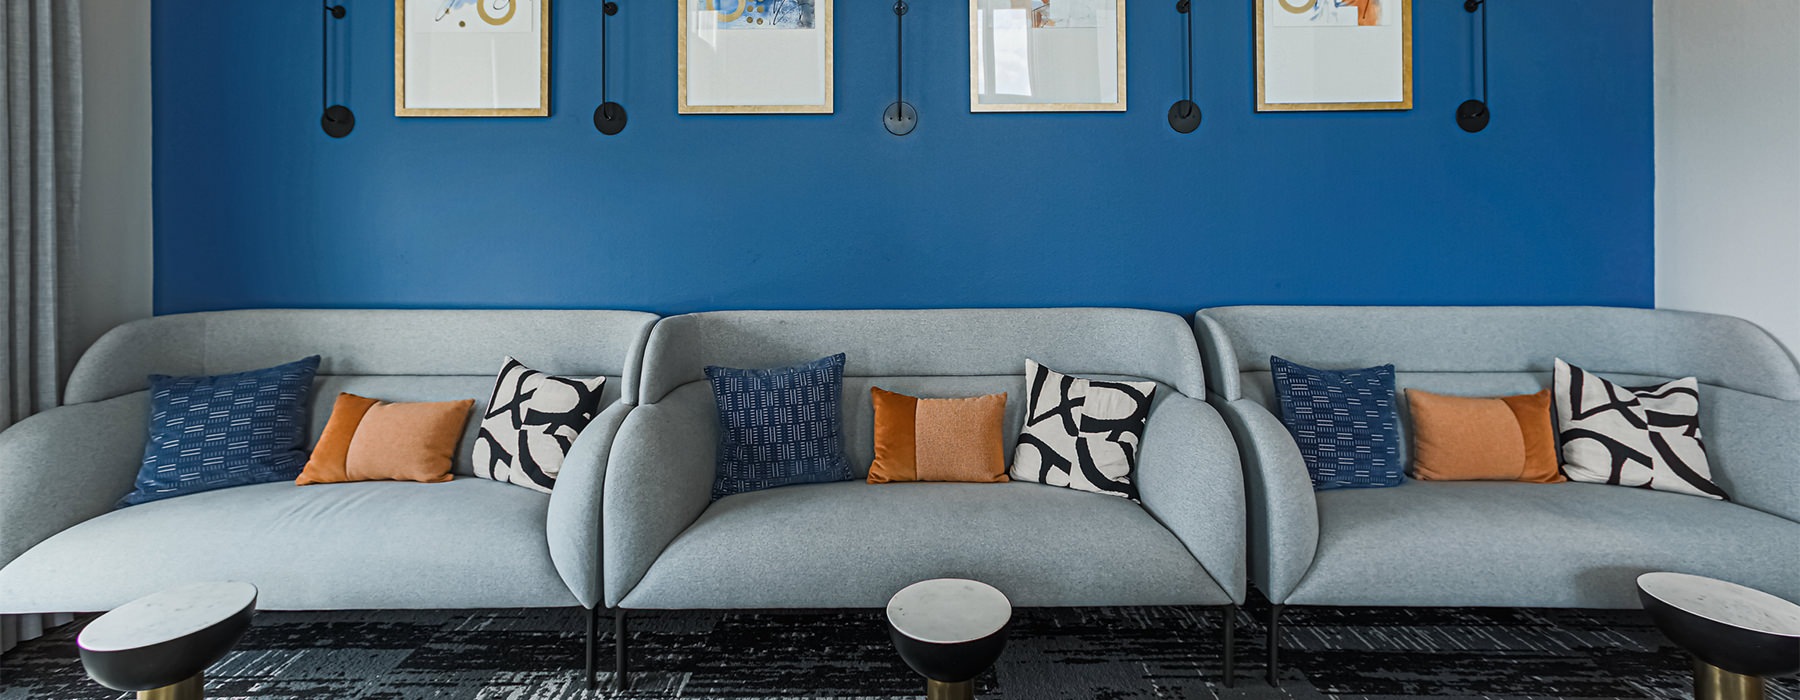 Gray couches in a lounge room with a blue wall